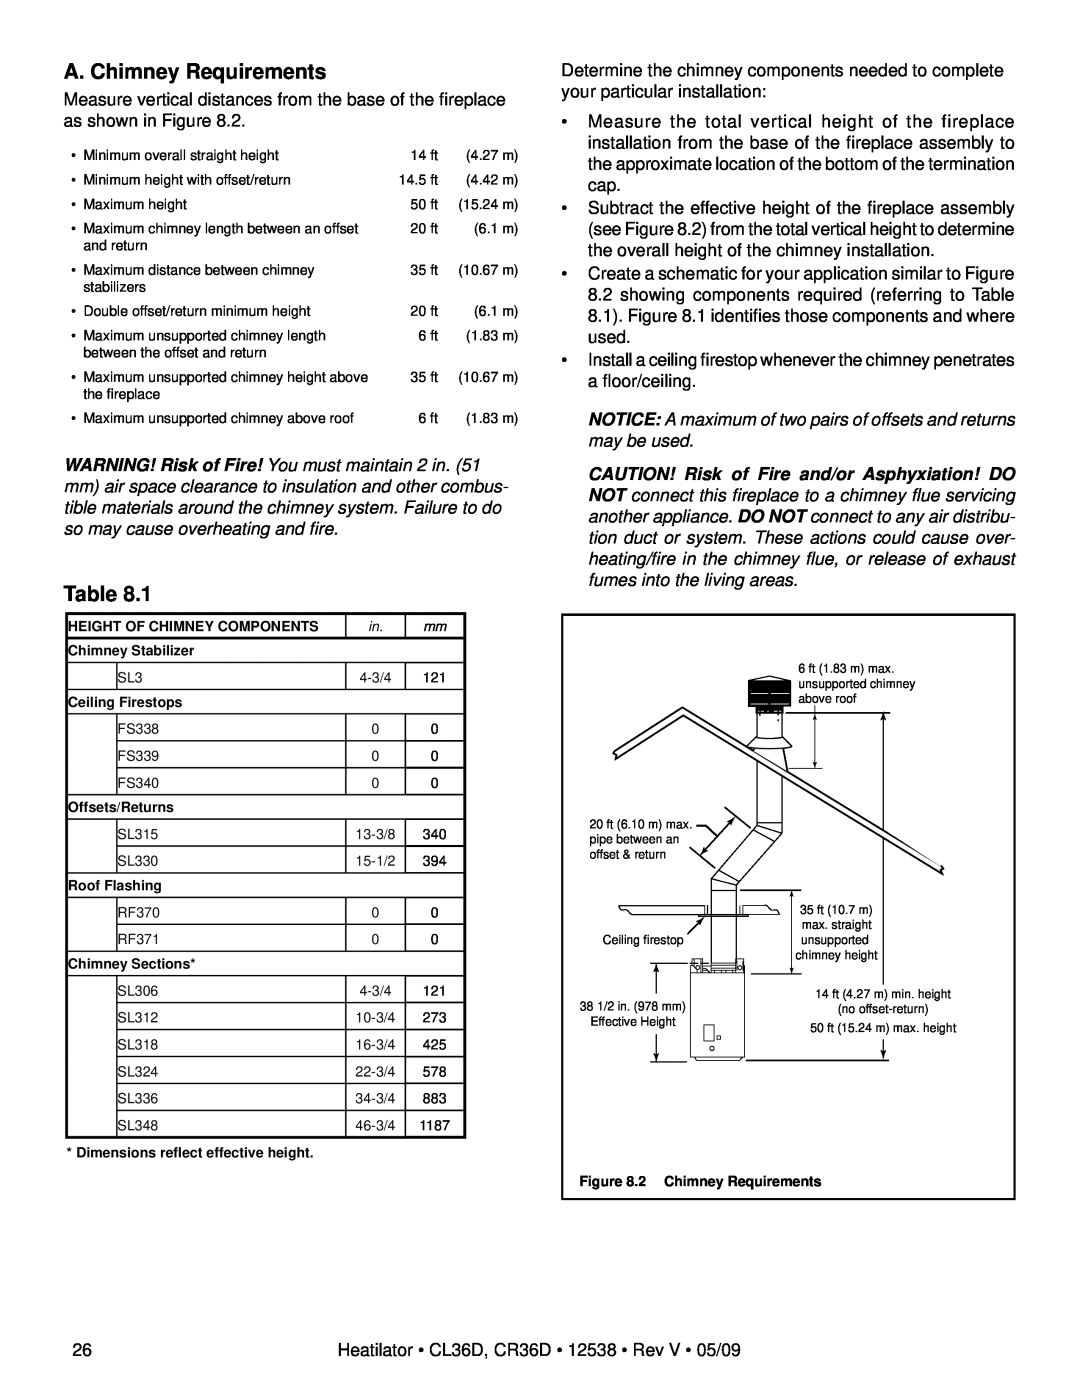 Heatiator CR36D, CL36D owner manual A. Chimney Requirements 